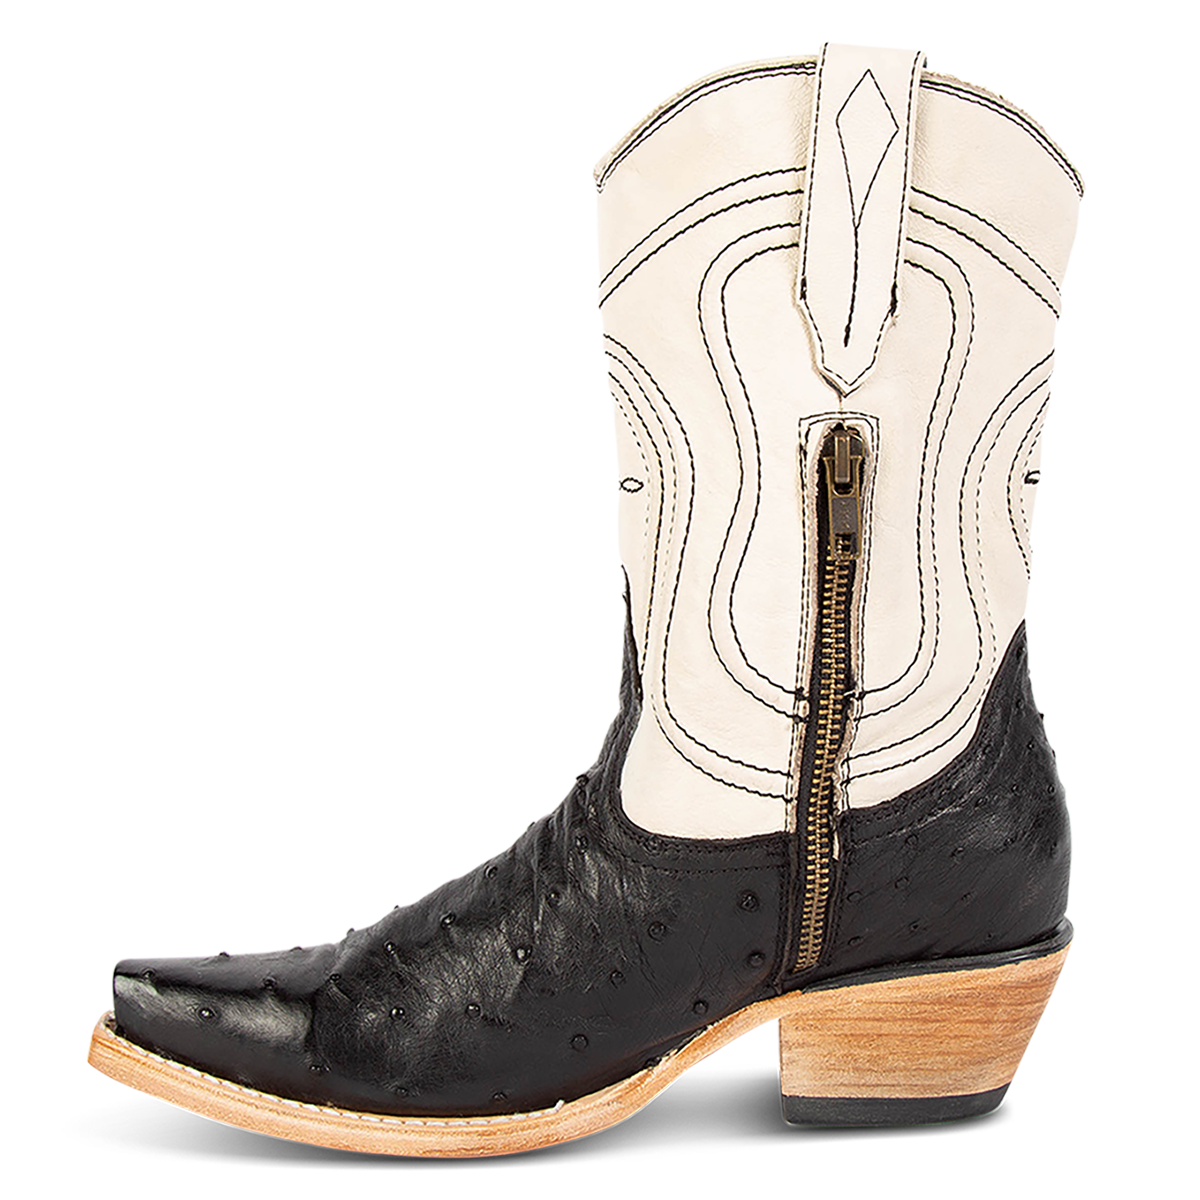 Inside view showing zip closure on FREEBIRD women's Weston black ostrich multi exotic leather mid calf cowgirl mid calf boot